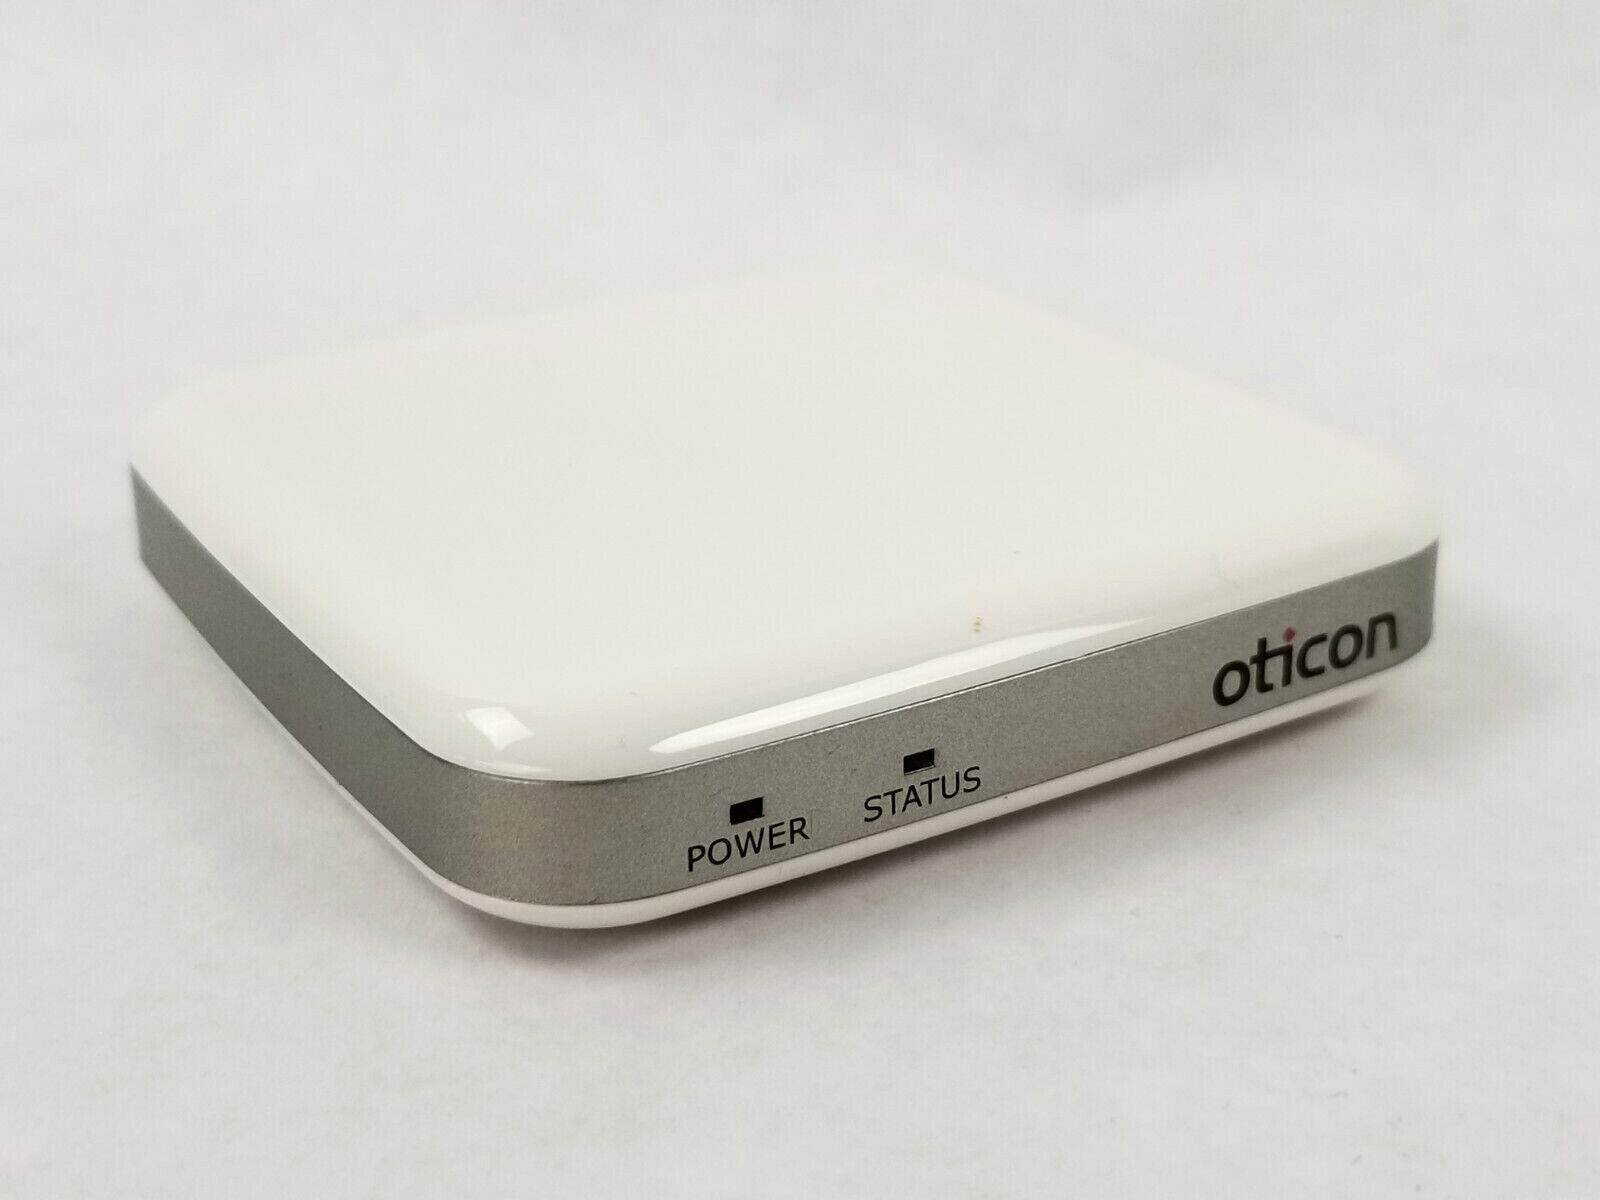 Oticon ConnectLine TV adapter Model TV 75-02  Preowned Good Condition